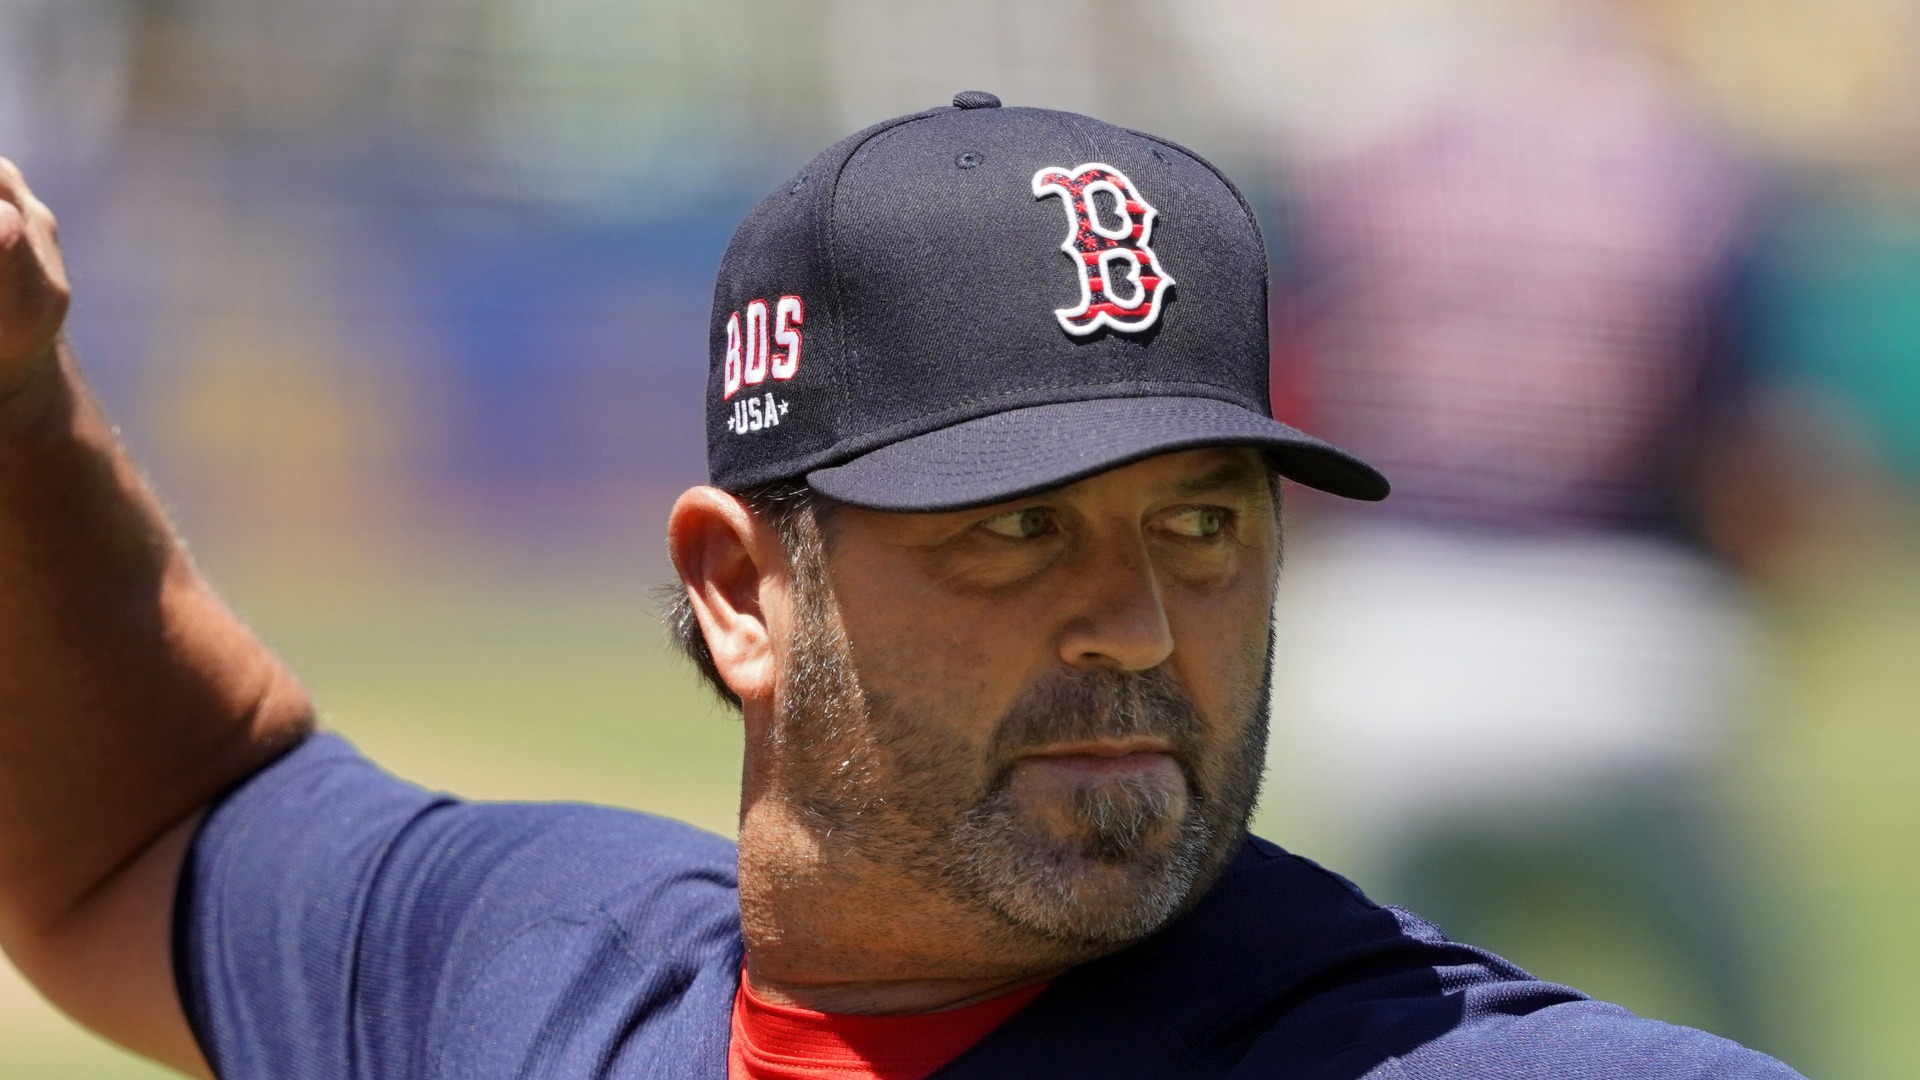 With Jason Varitek in town, Sea Dogs' Hot Stove Dinner stokes Red Sox fever